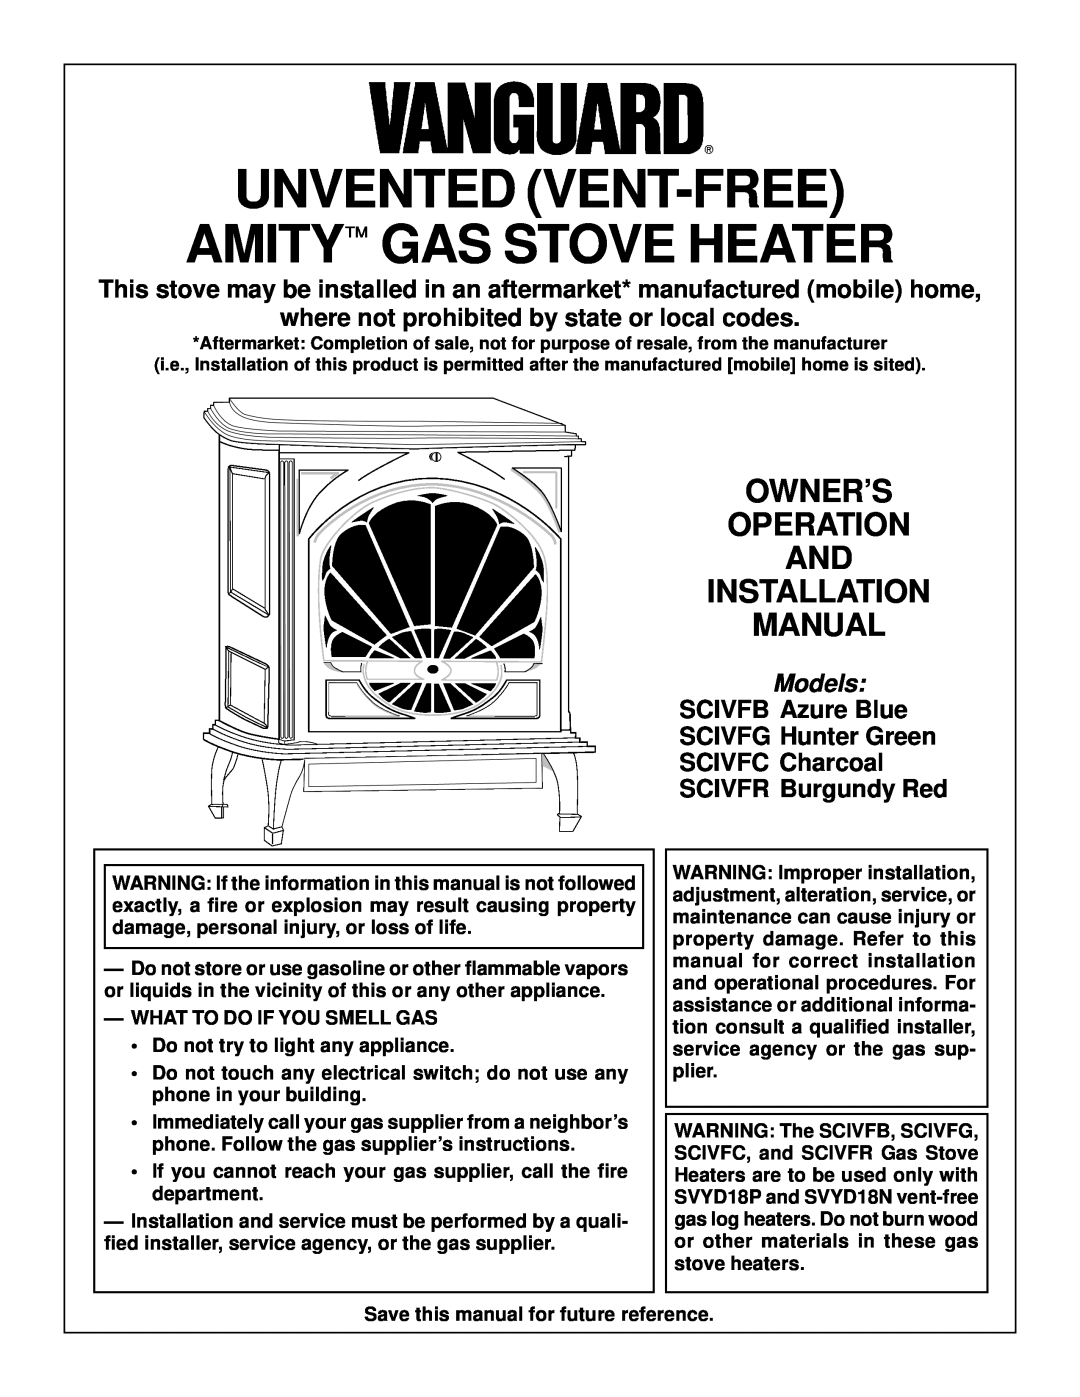 Vanguard Heating SCIVFB, SCIVFG, SCIVFC, SCIVFR installation manual Unvented Vent-Free Amity Gas Stove Heater, Models 